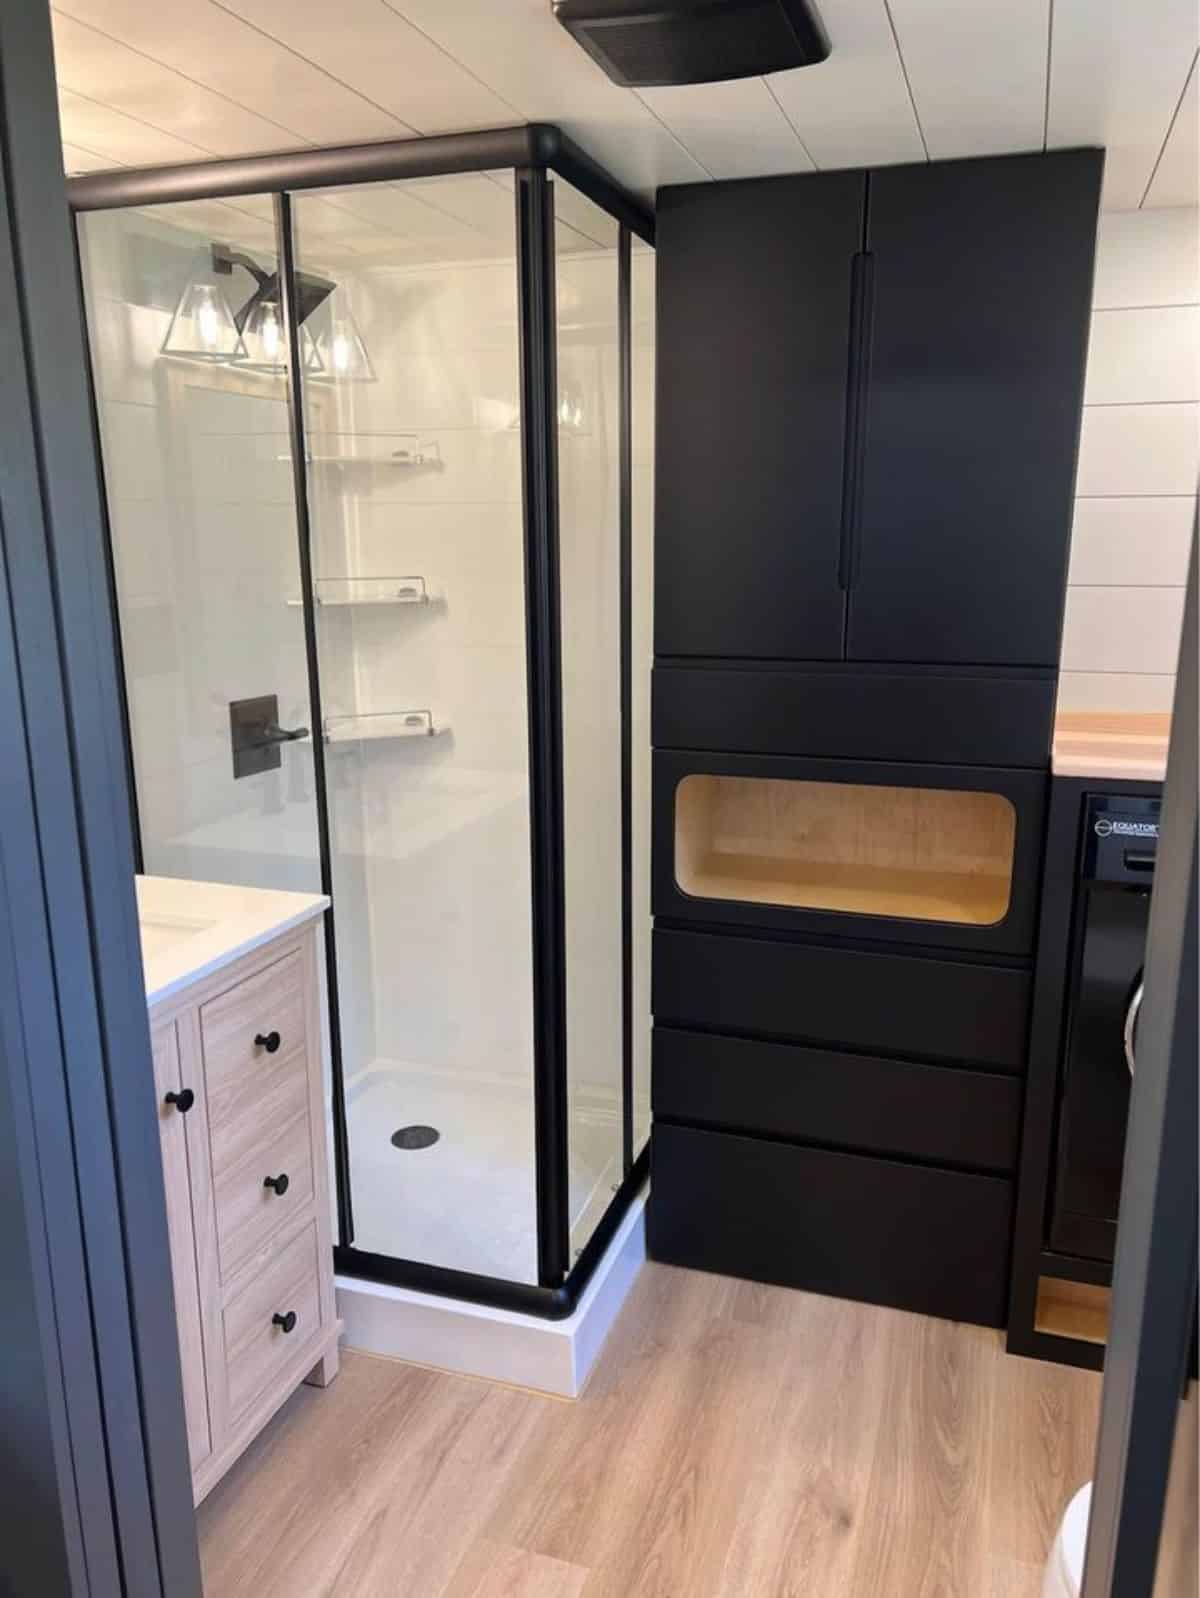 bathroom of beautiful tiny home has standard fittings with full length shower area with glass enclosure